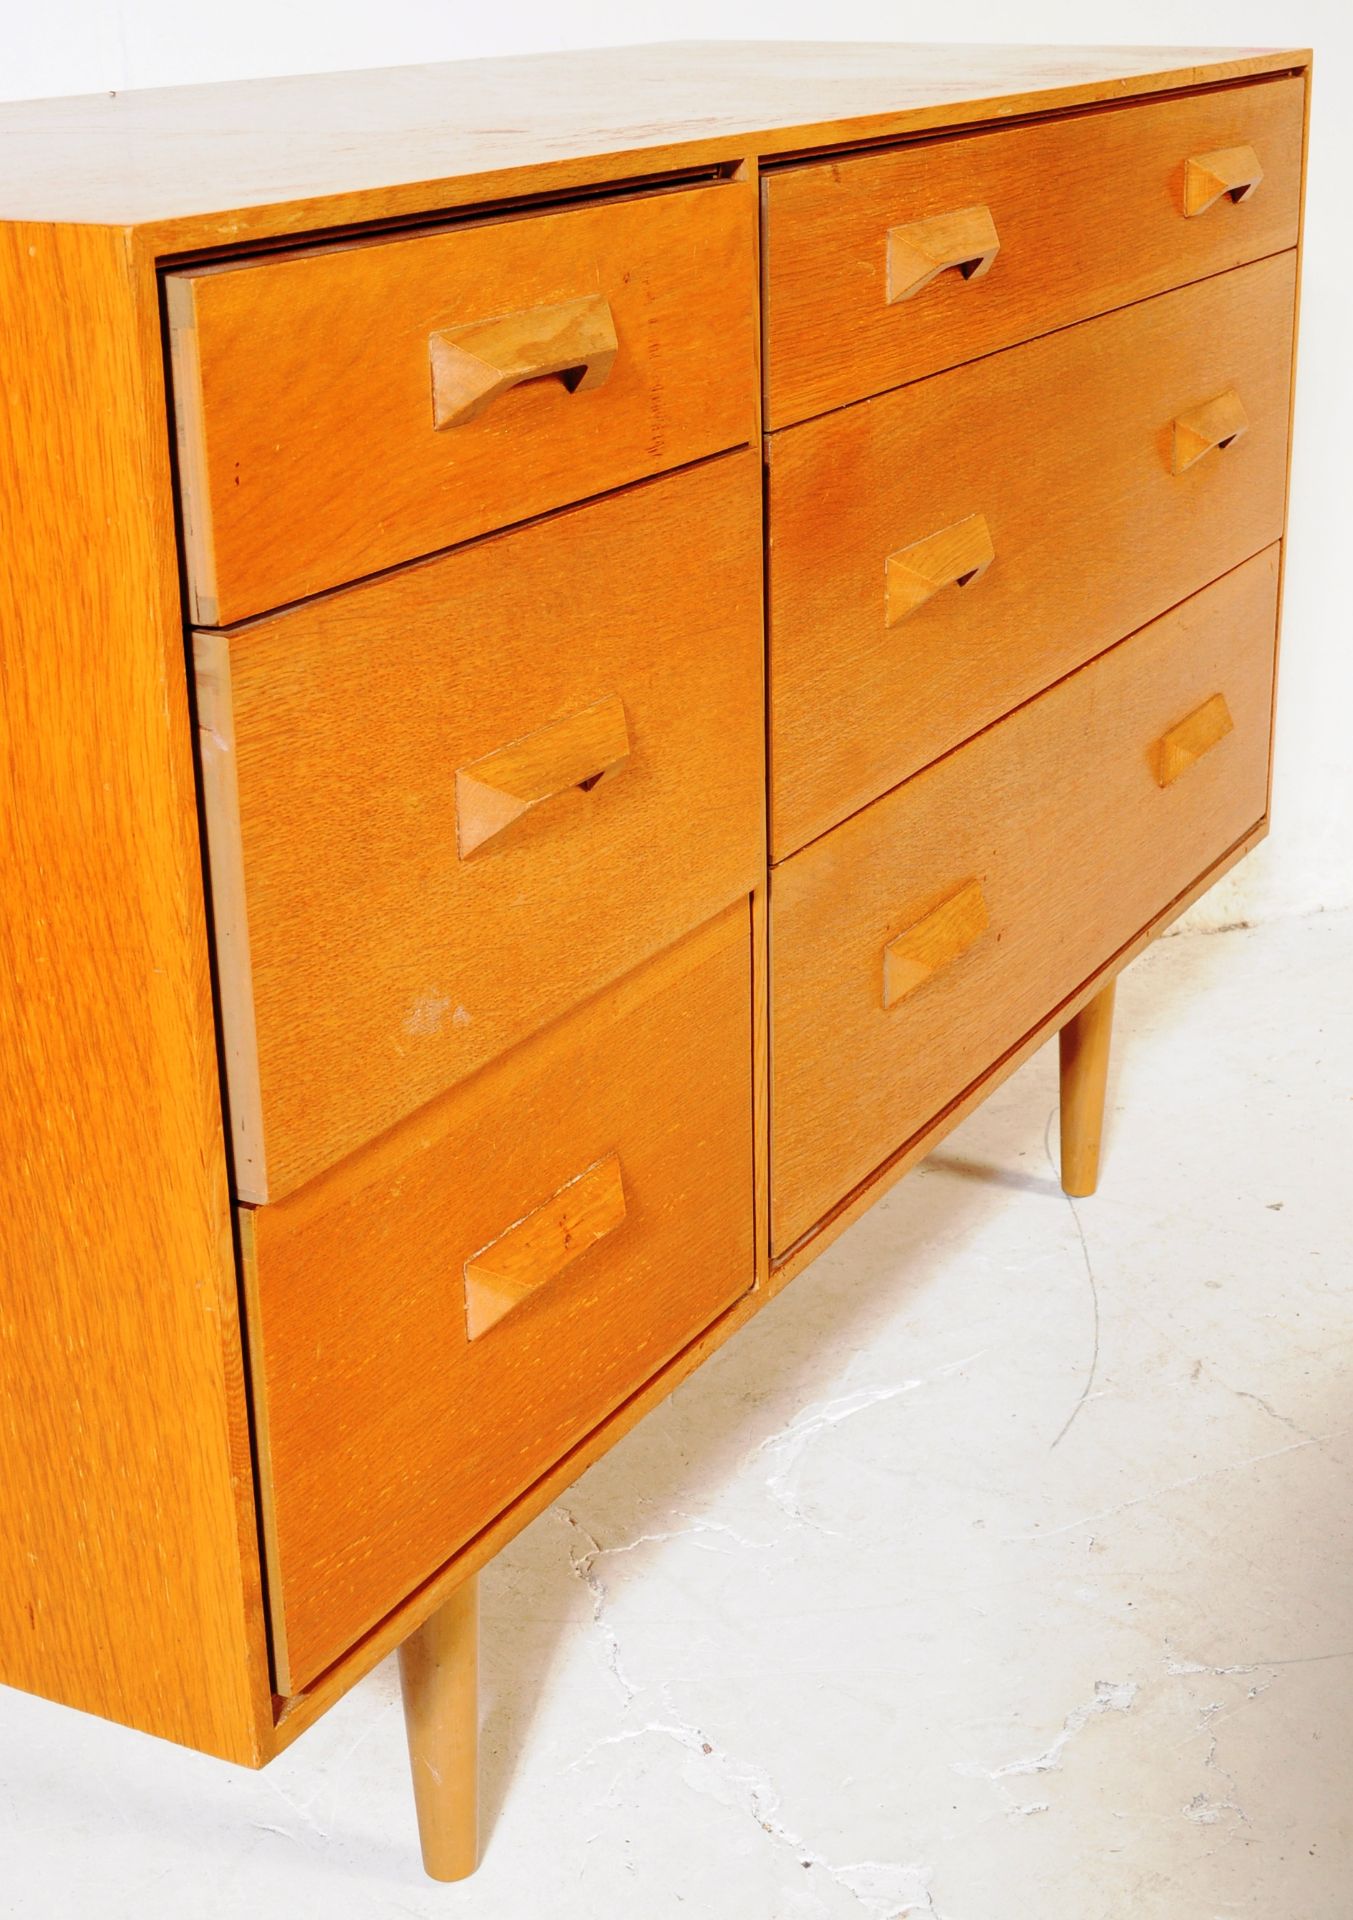 MID 20TH CENTURY STAG CONCORD RANGE OAK SIDEBOARD - Image 7 of 7